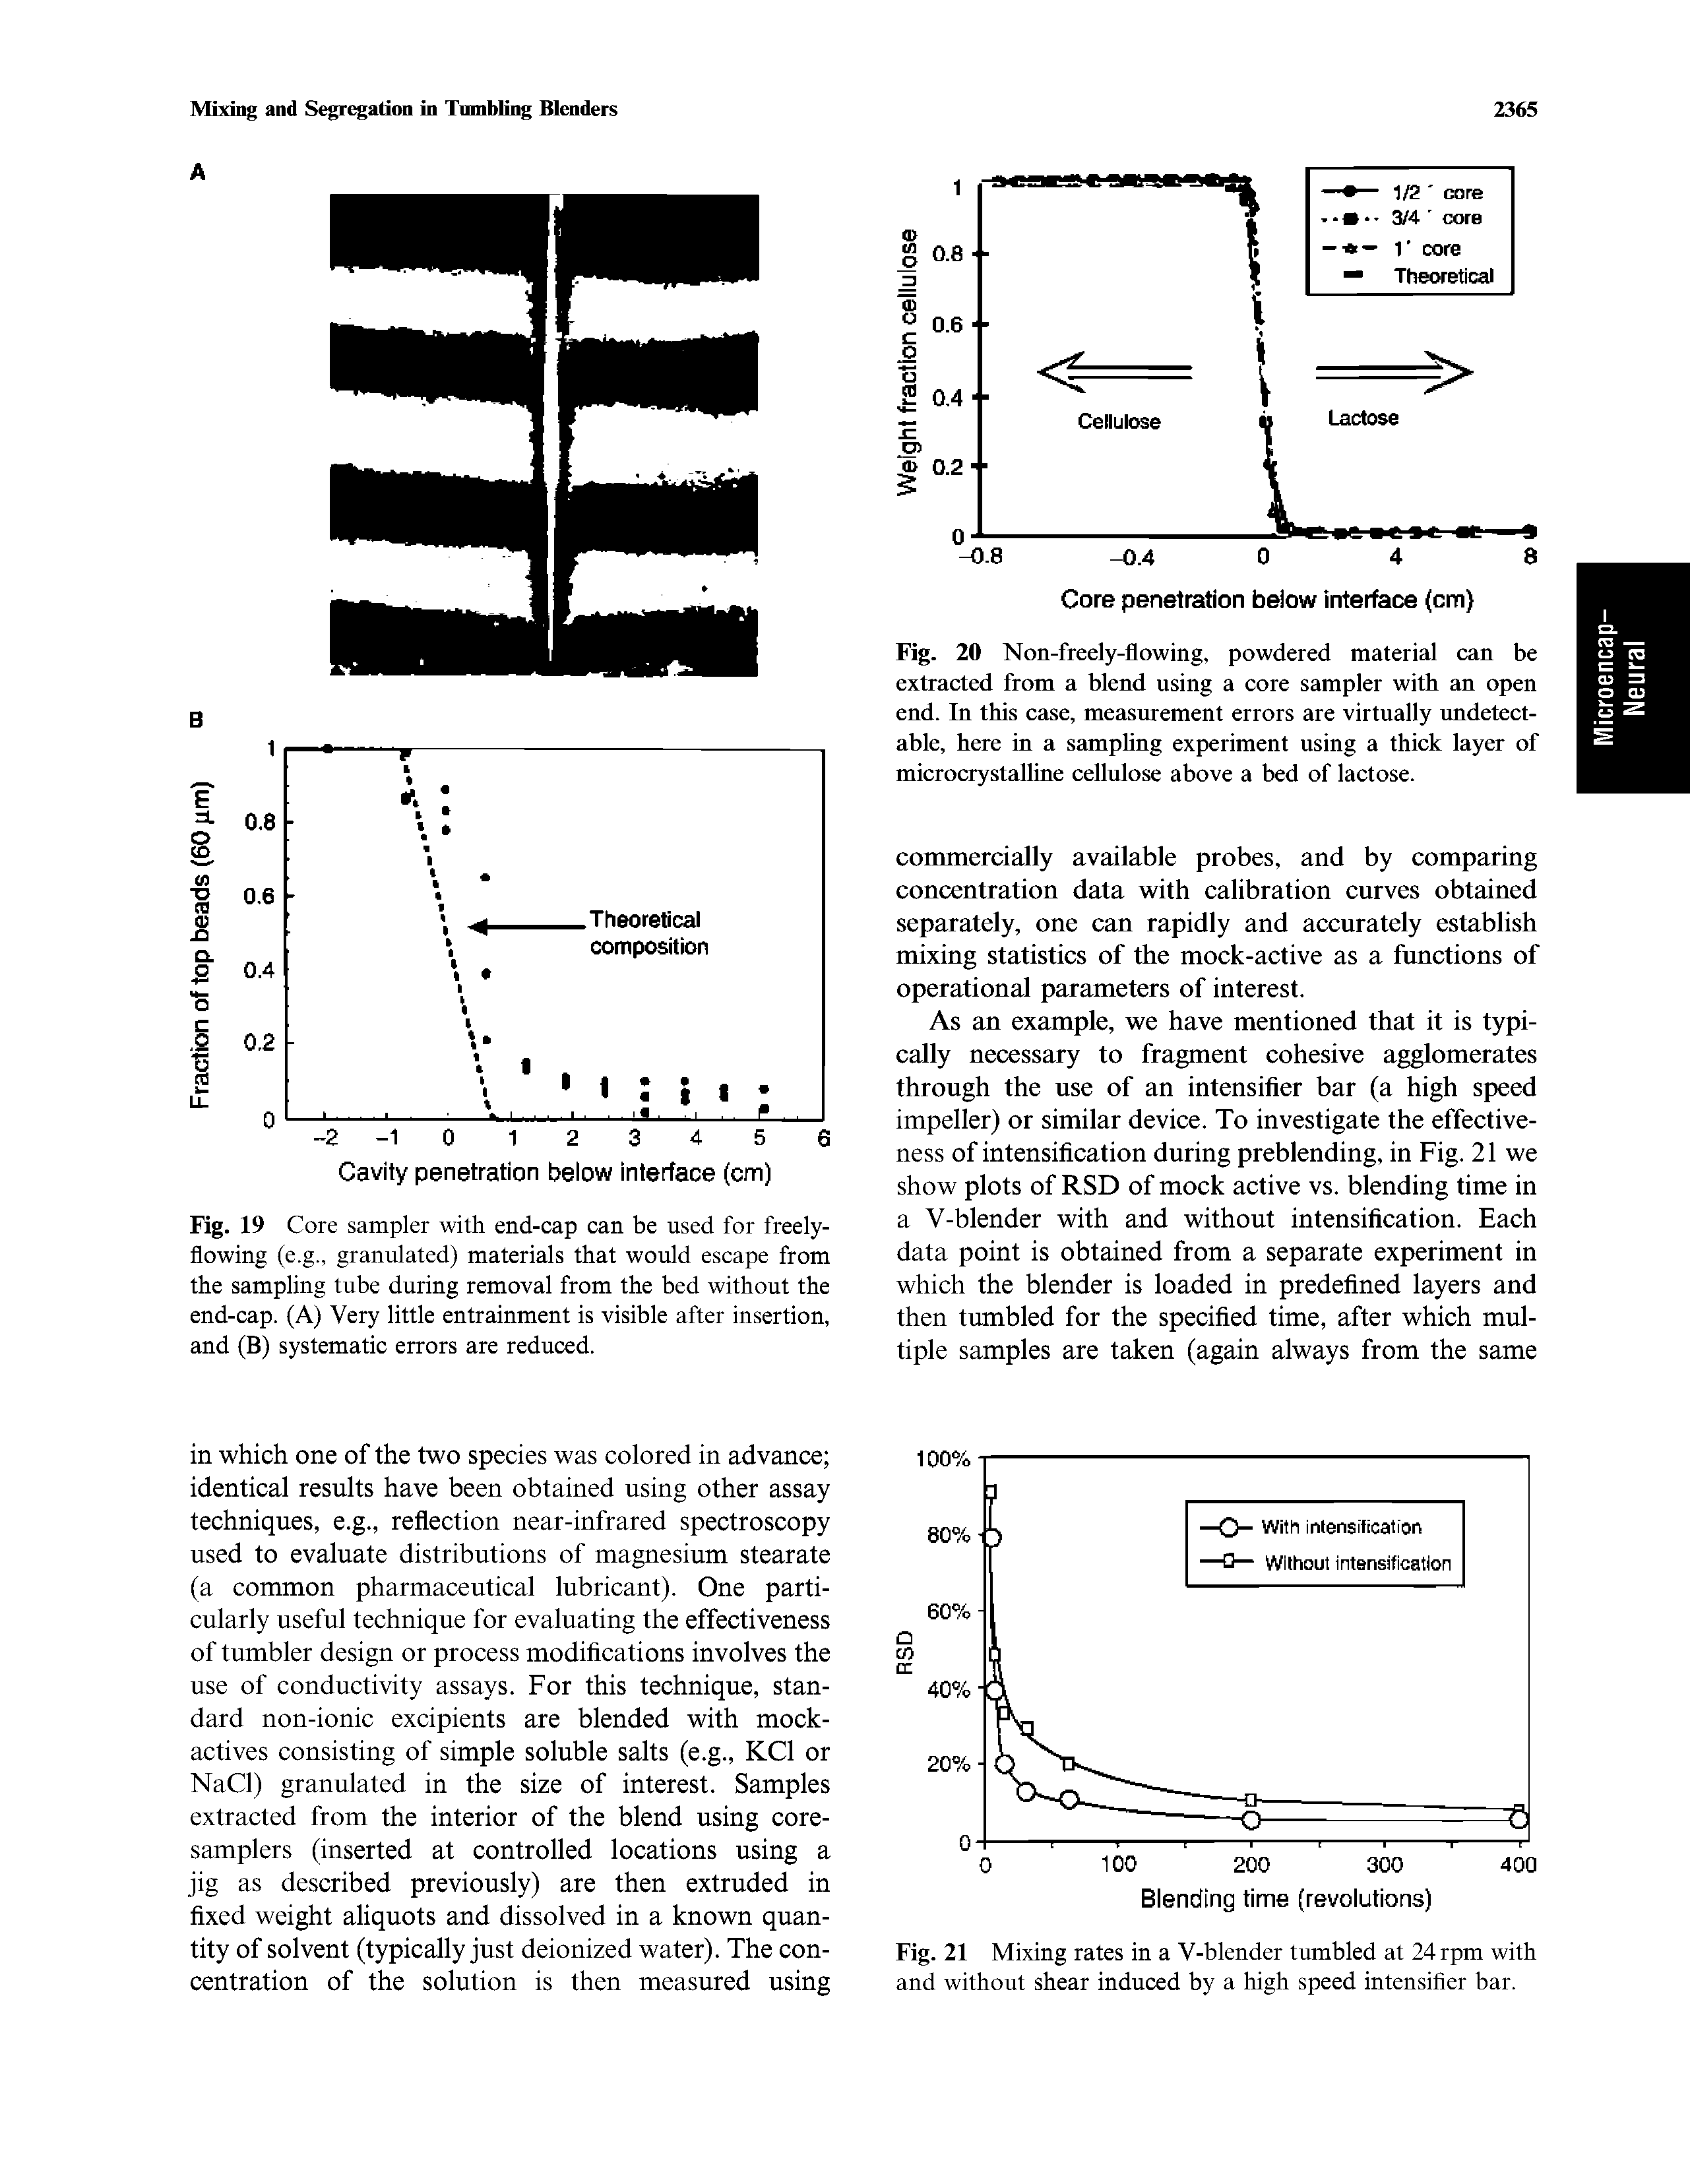 Fig. 20 Non-freely-flowing, powdered material can be extracted from a blend using a core sampler with an open end. In this case, measurement errors are virtually undetectable, here in a sampling experiment using a thick layer of microcrystalline cellulose above a bed of lactose.